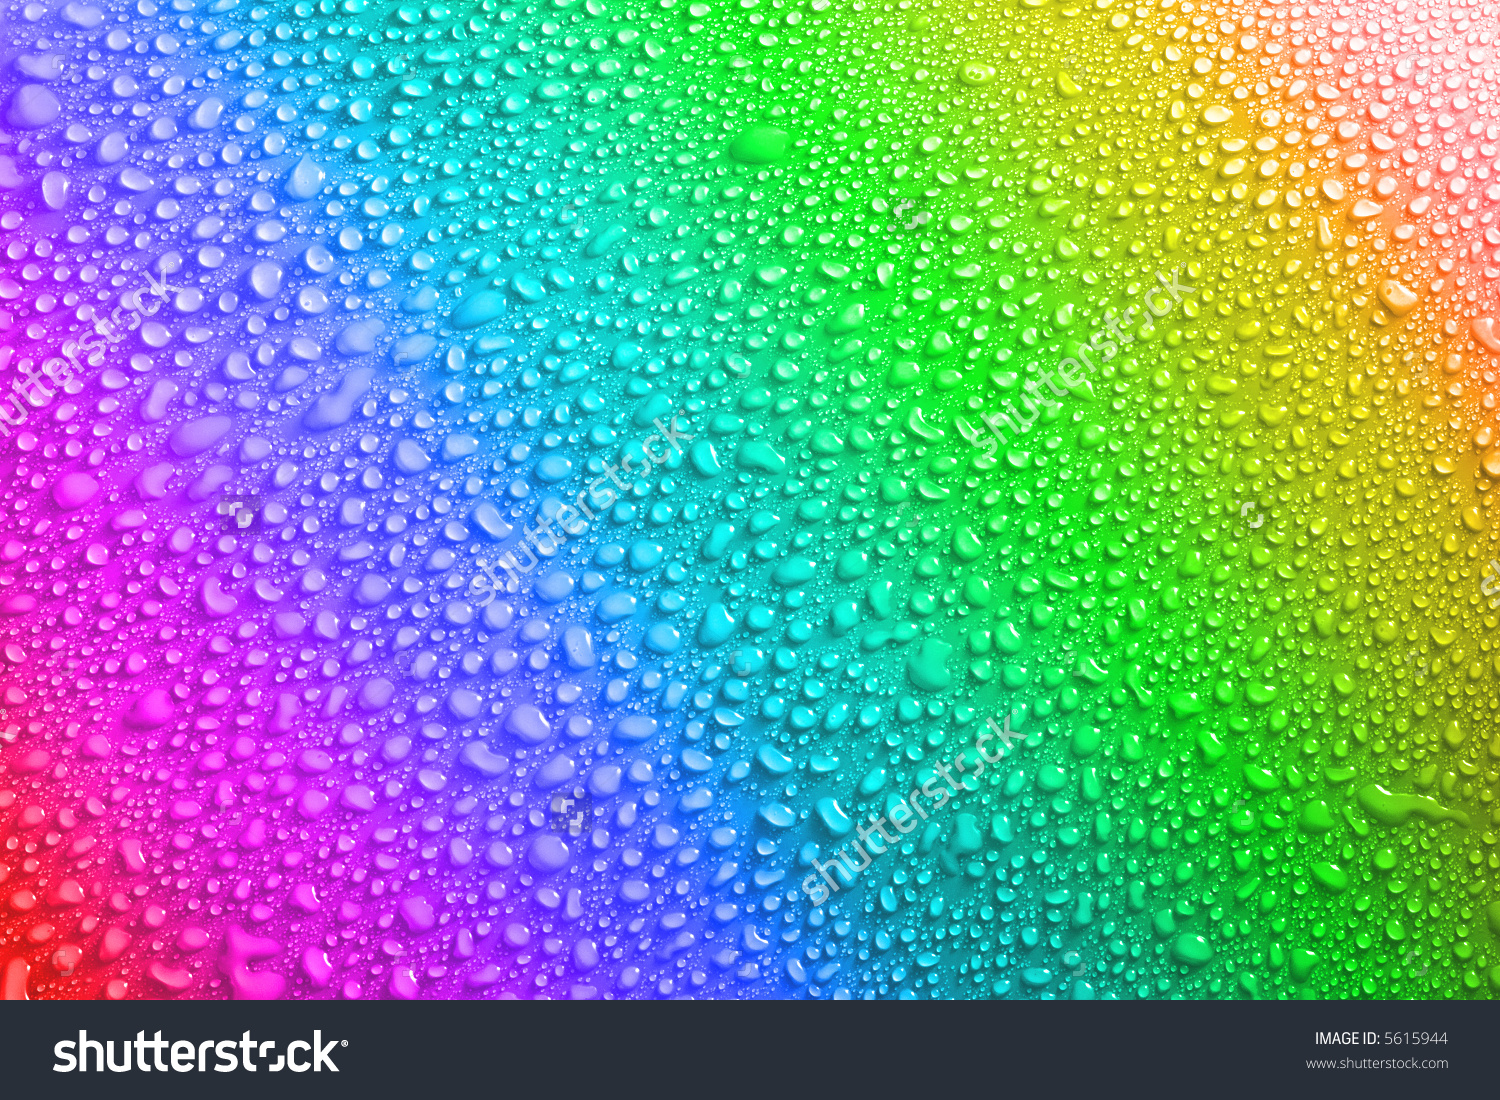 drop of water on colorful image